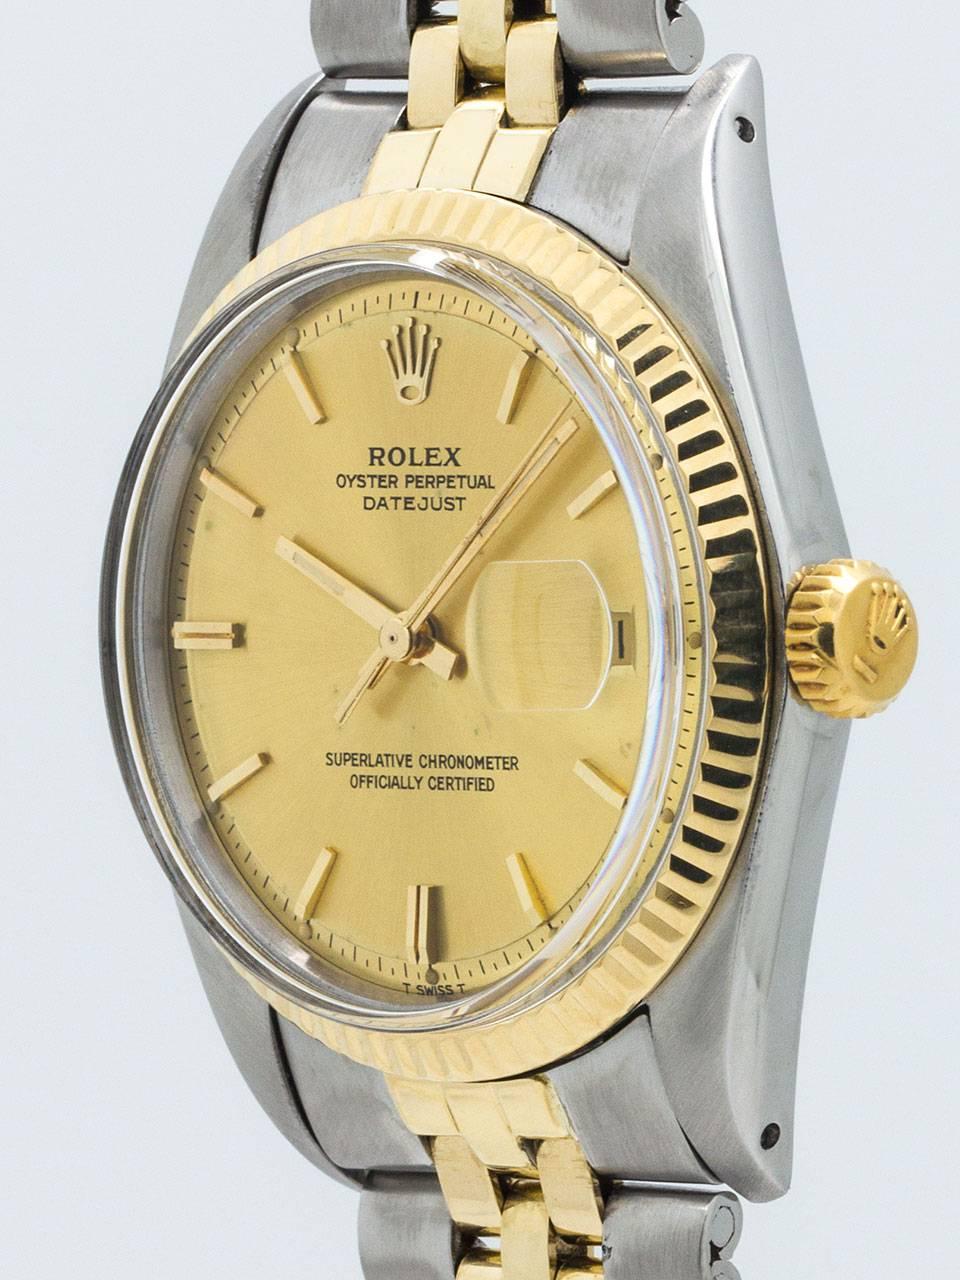 Vintage Rolex Datejust ref 1601 serial# 1.1 million circa 1964. Featuring 36mm full size stainless steel man’s model with 14K YG fluted bezel, gold shell Rolex crown, acrylic crystal, and beautifully restored antique white pie pan dial with applied